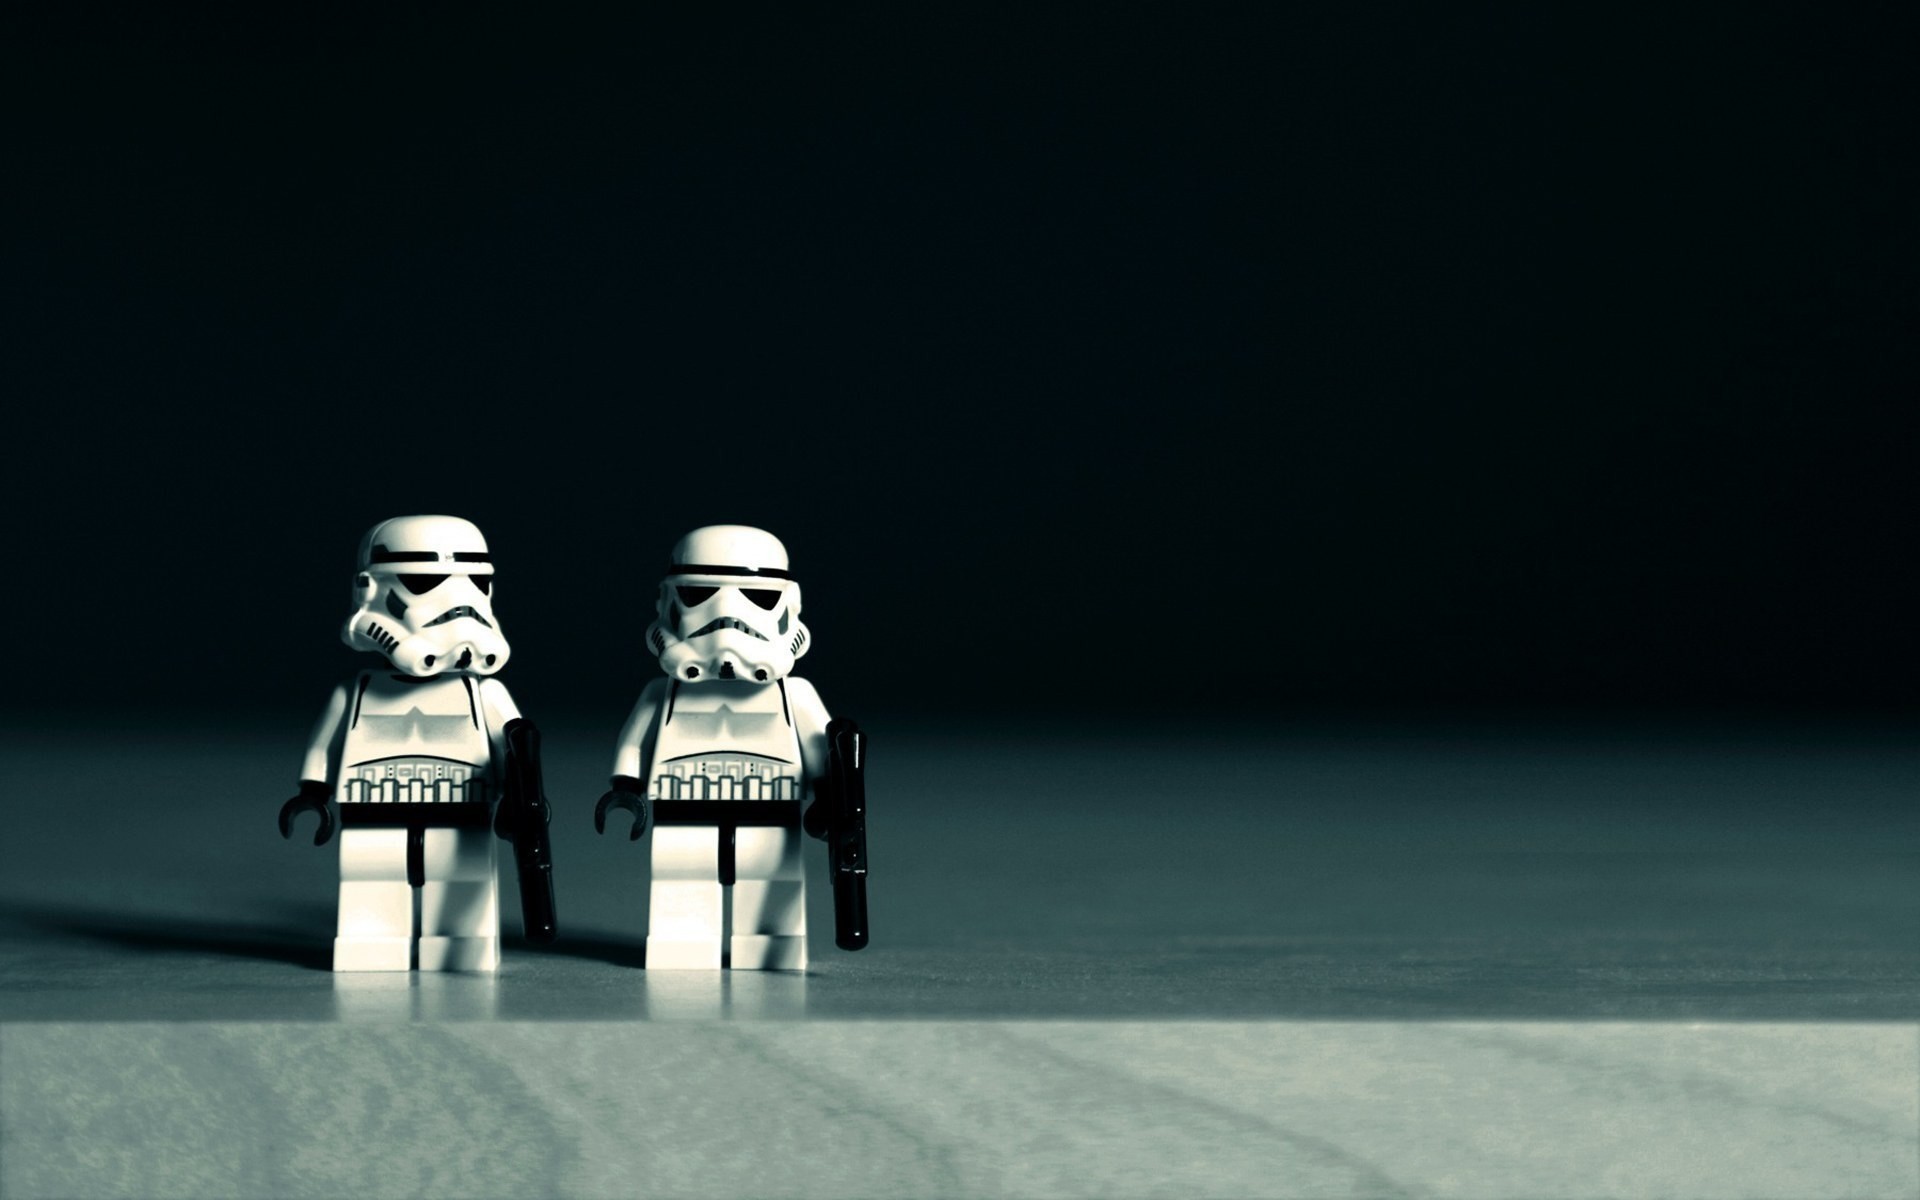 Stormtroopers Star Wars Lego Toys Desk HD Wallpaper – ZoomWalls